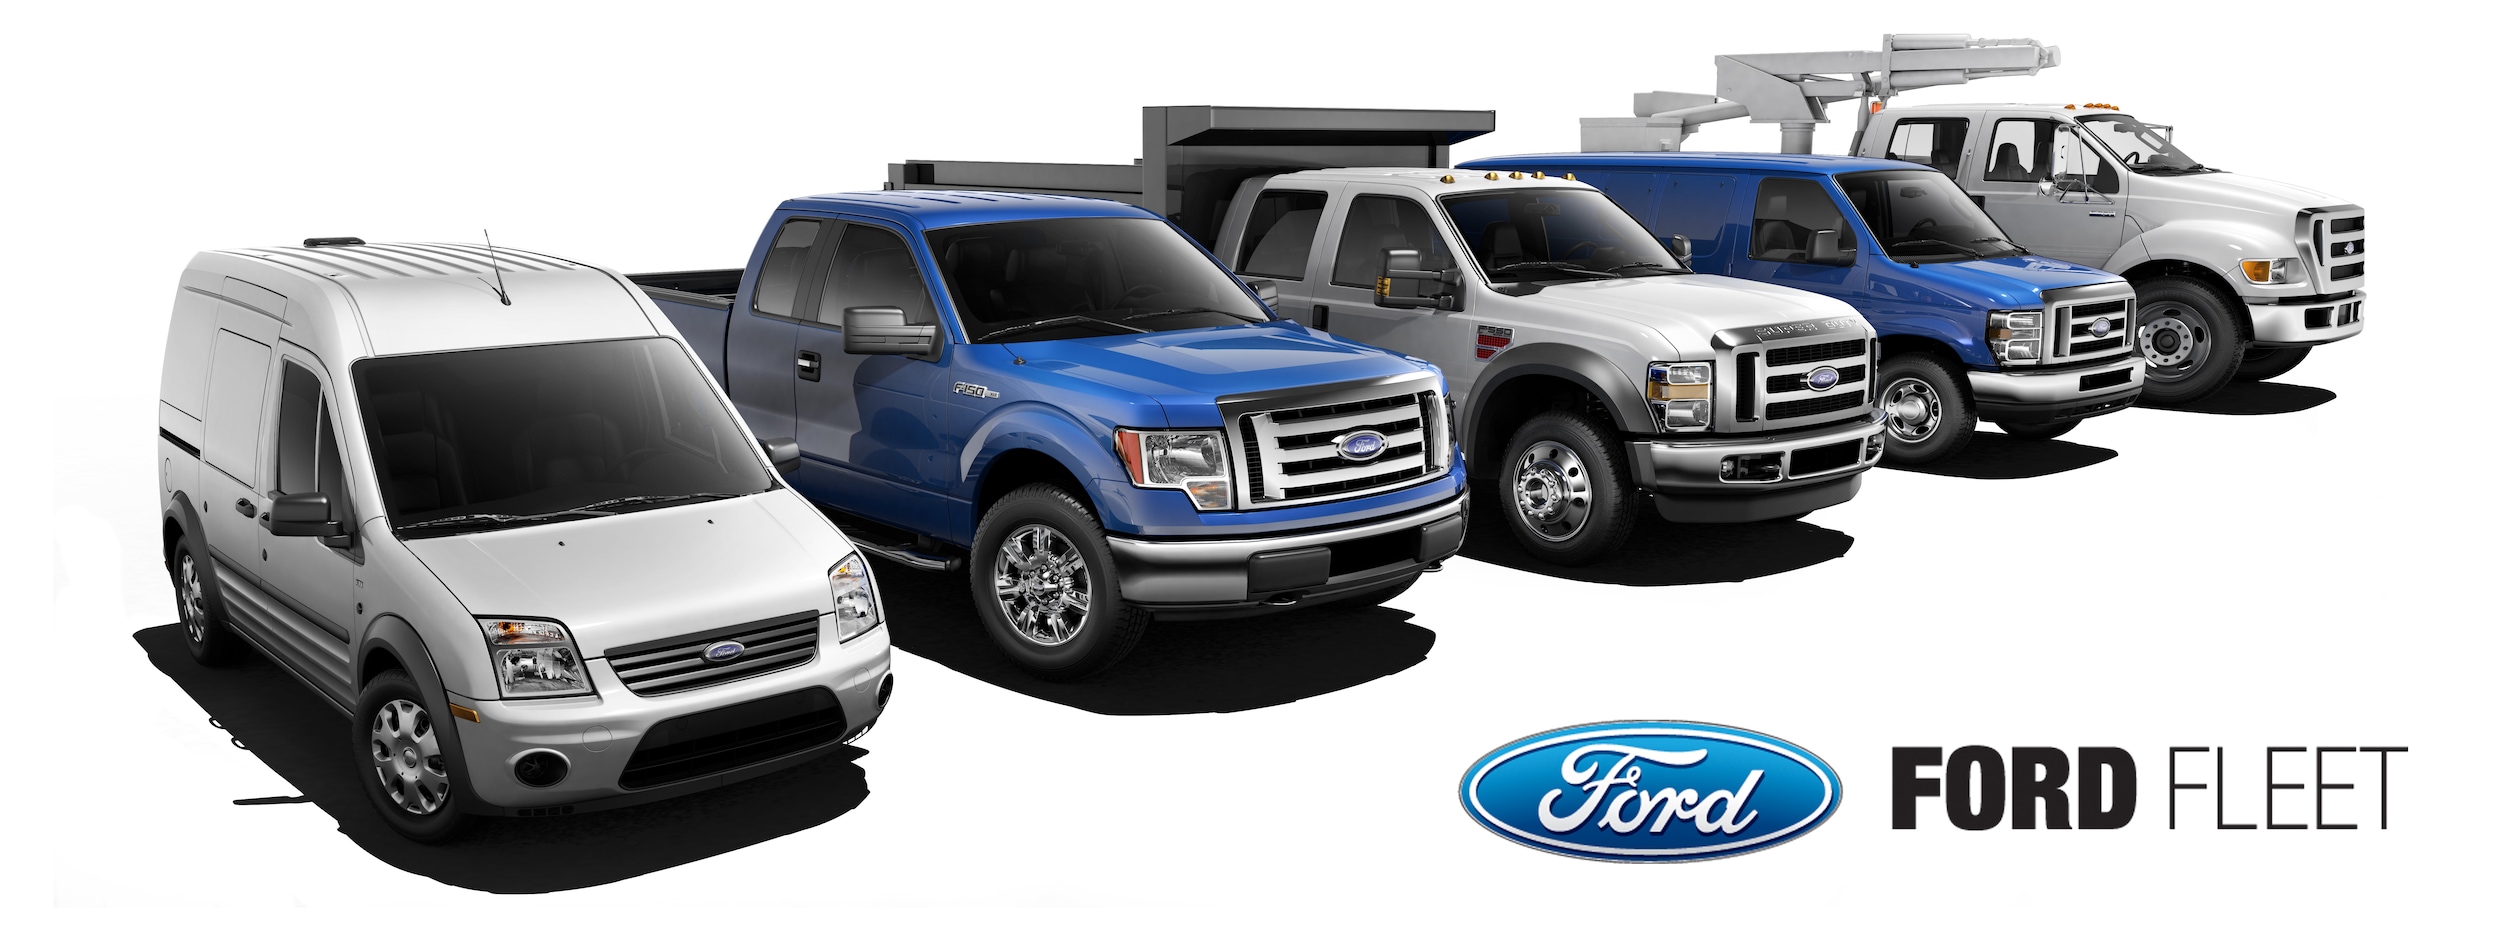 Ford fleet and commercial vehicles #5